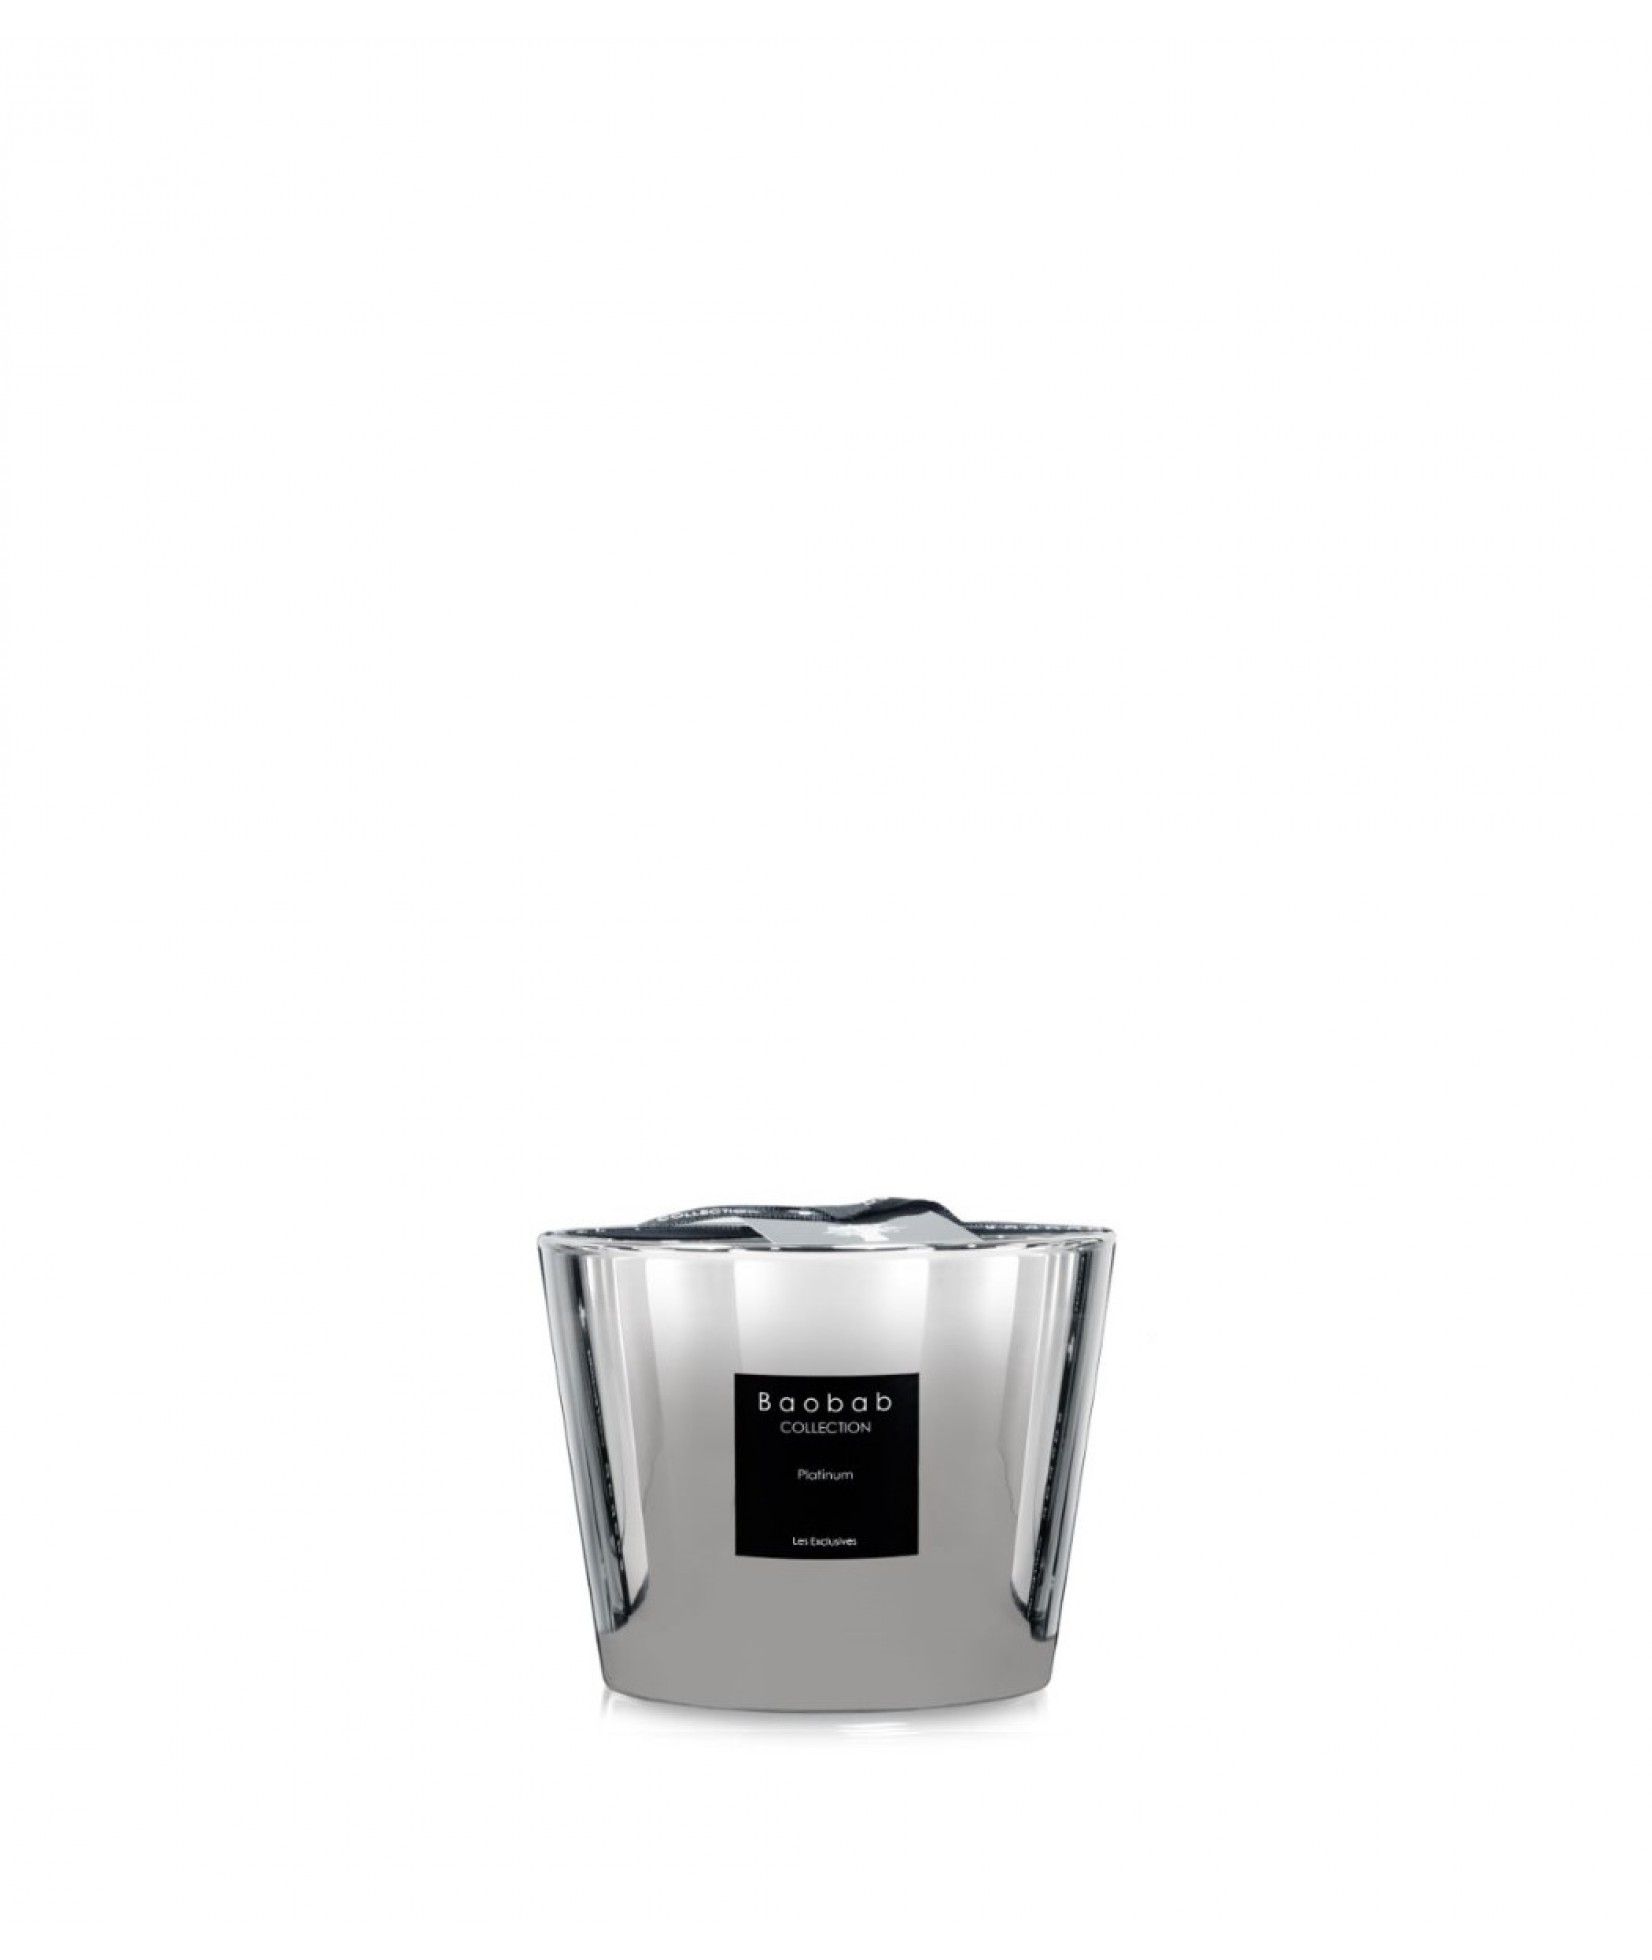 Baobap Scented Candle Platinum (Small)